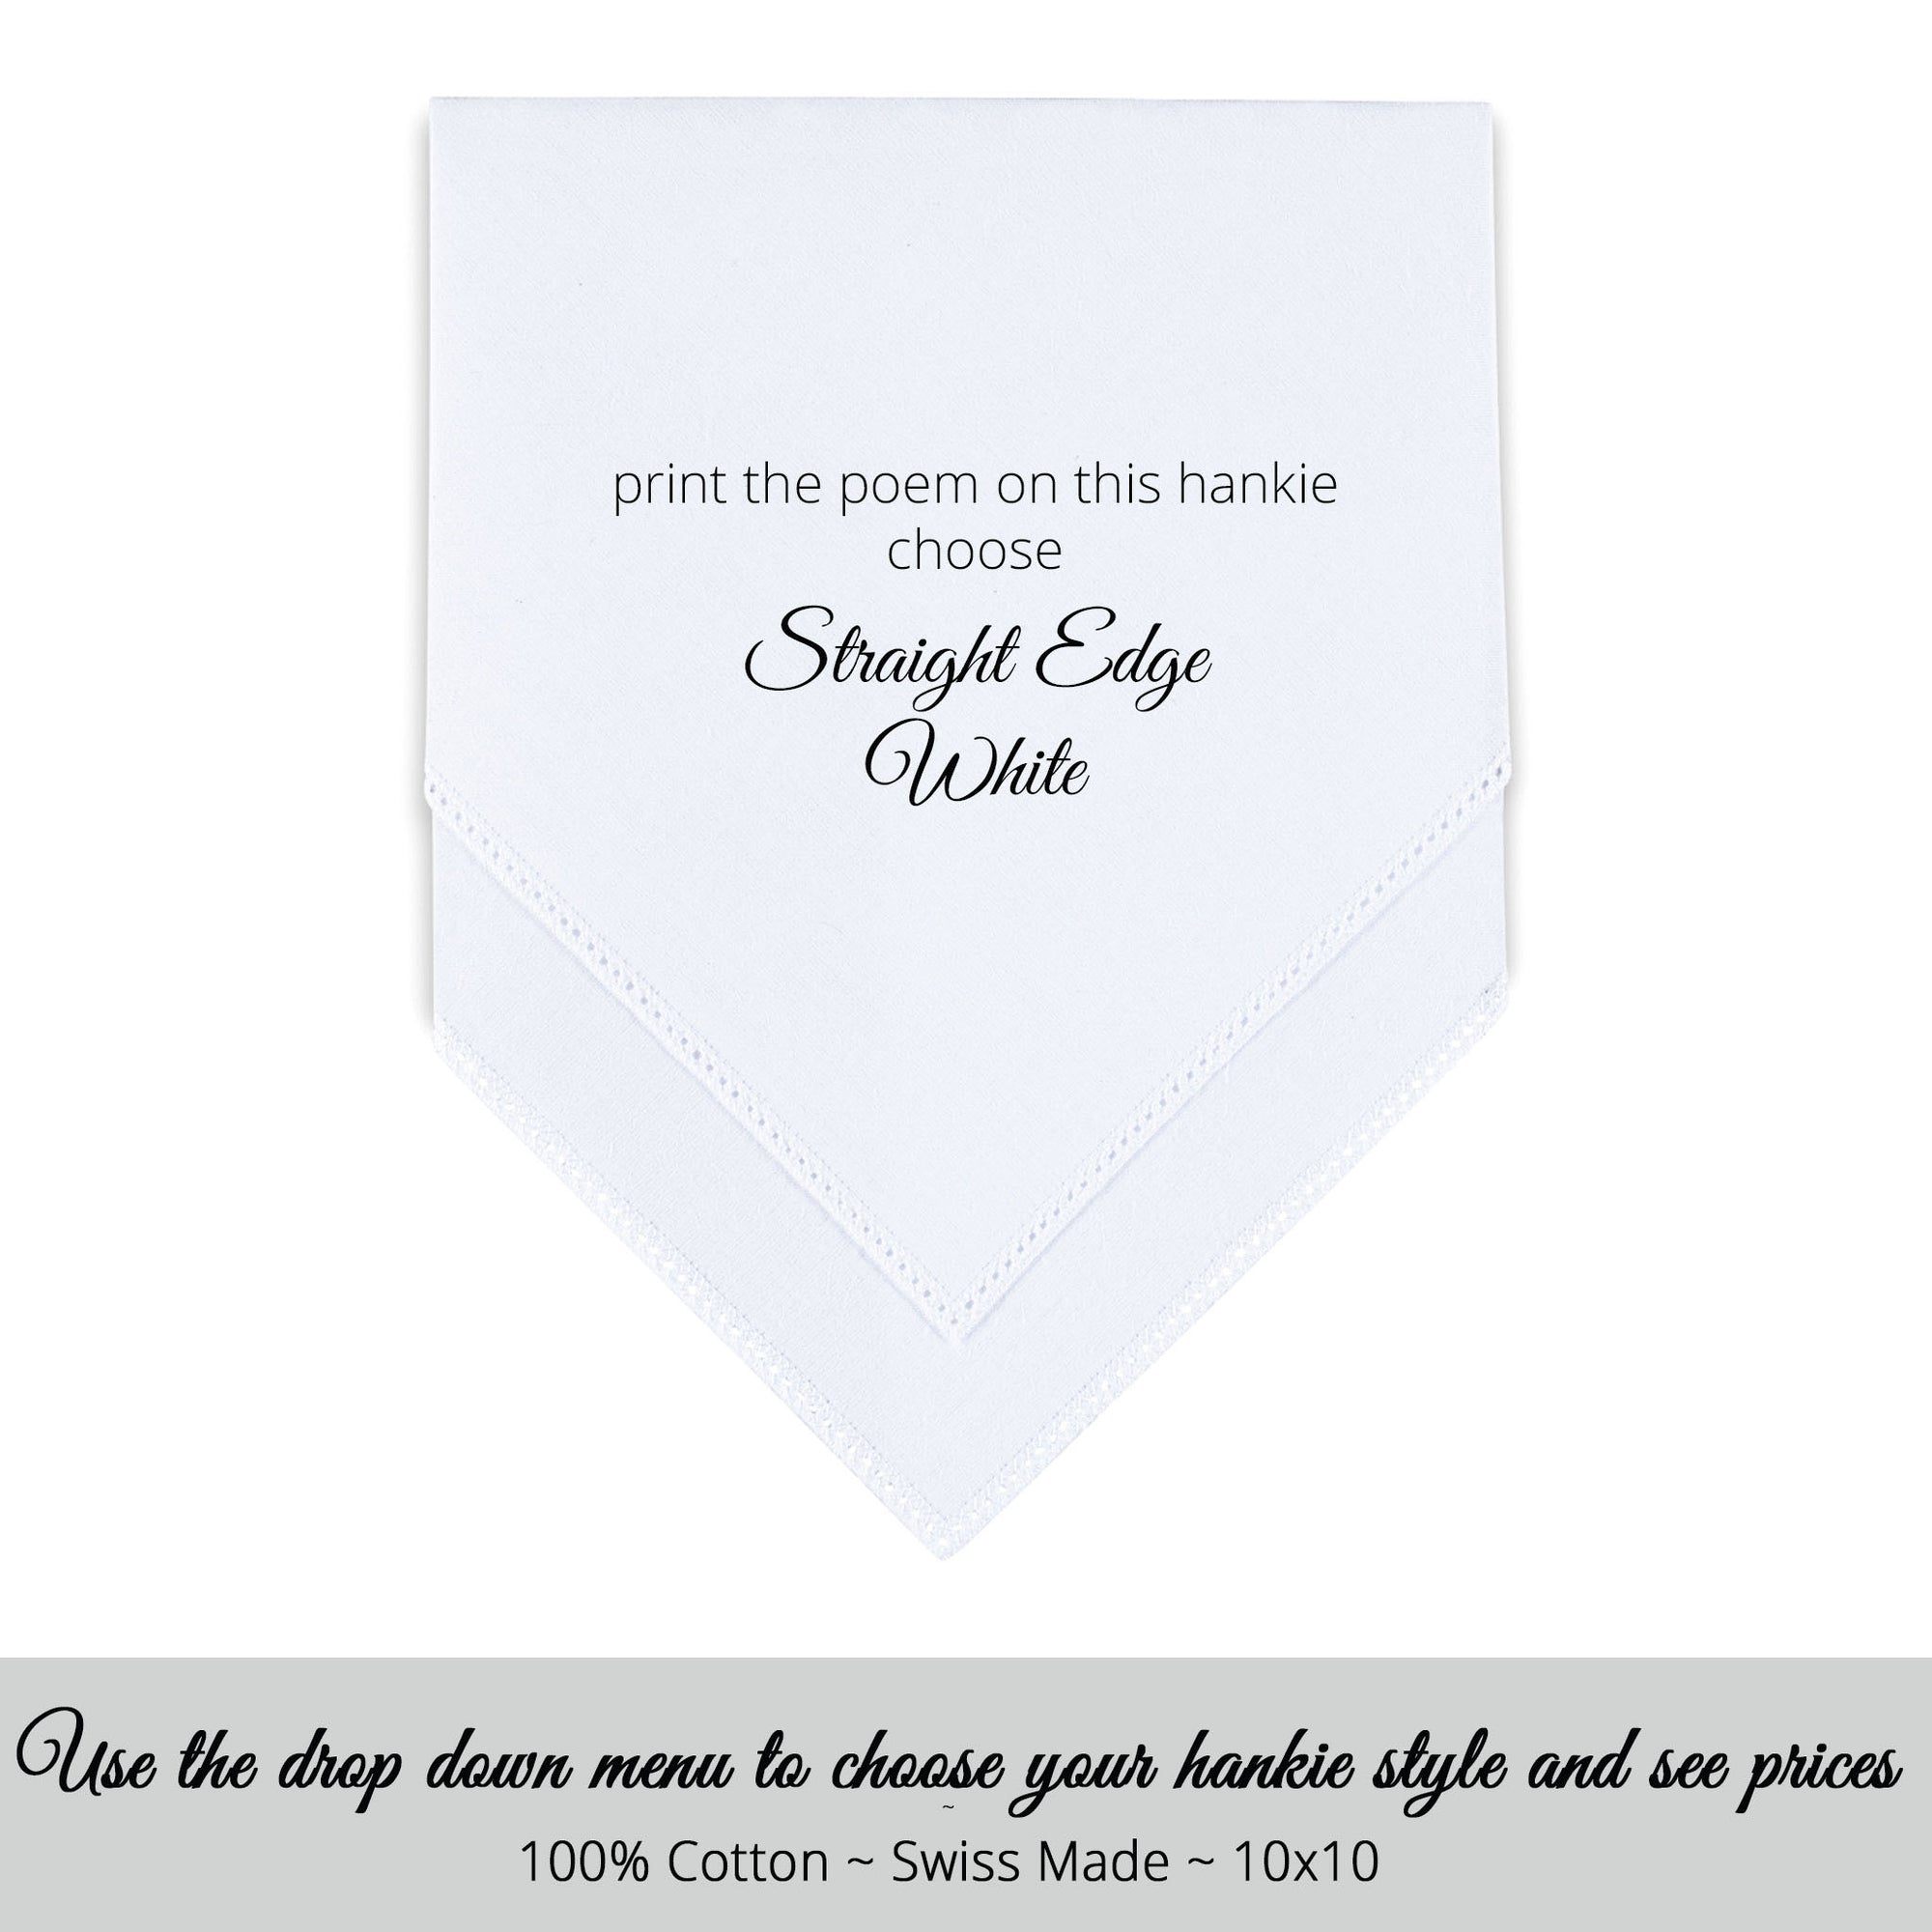 Straight edge white personalized wedding handkerchief for the parents of the Bride